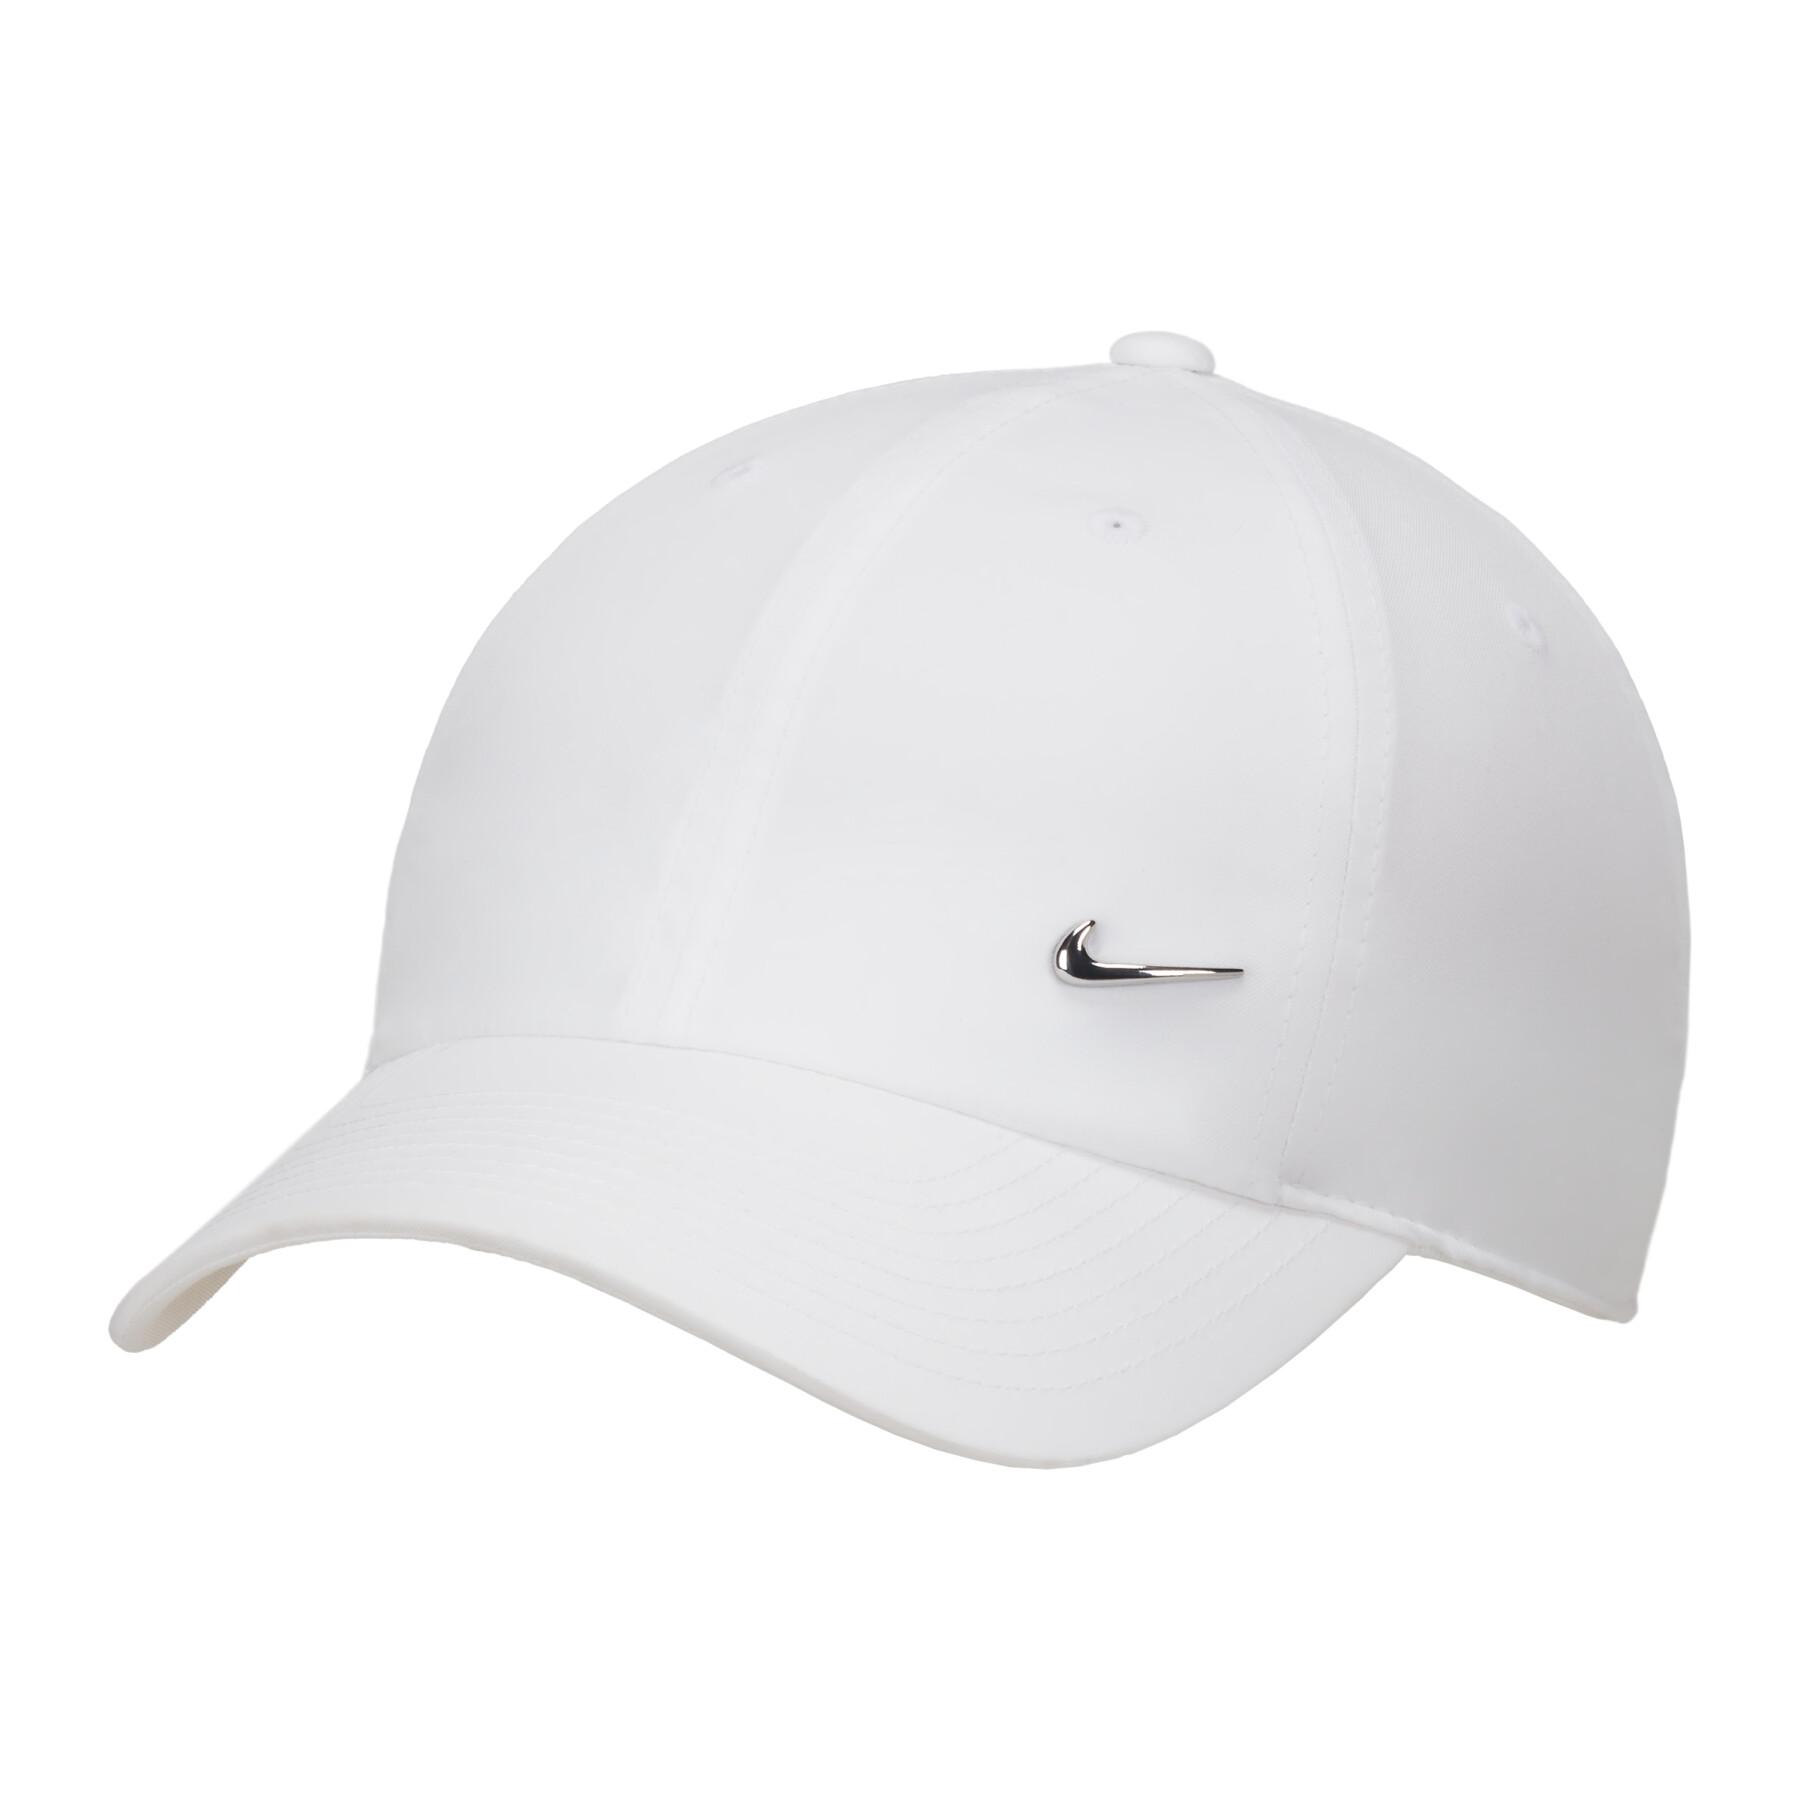 Cap without metal structure Nike Dri-FIT Club Swoosh